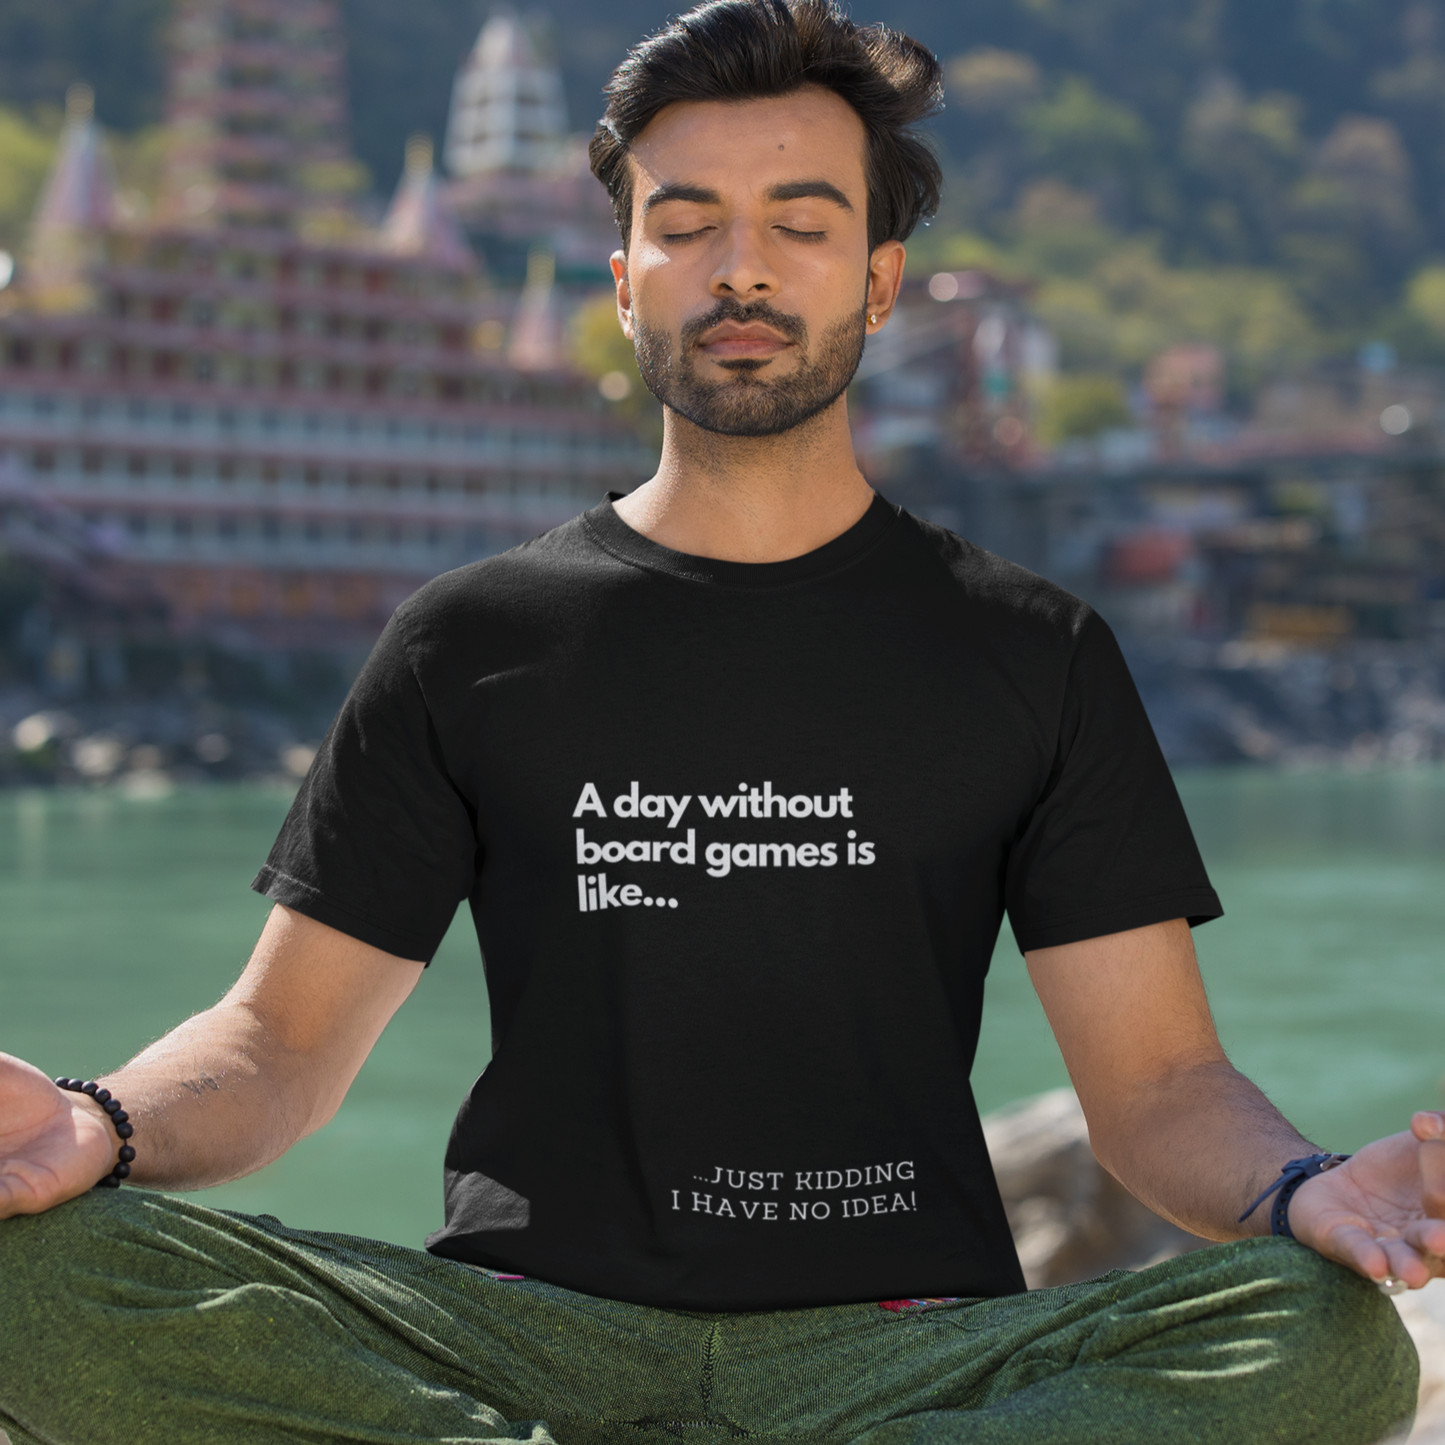 Board Game T Shirts - A day without board games is like…